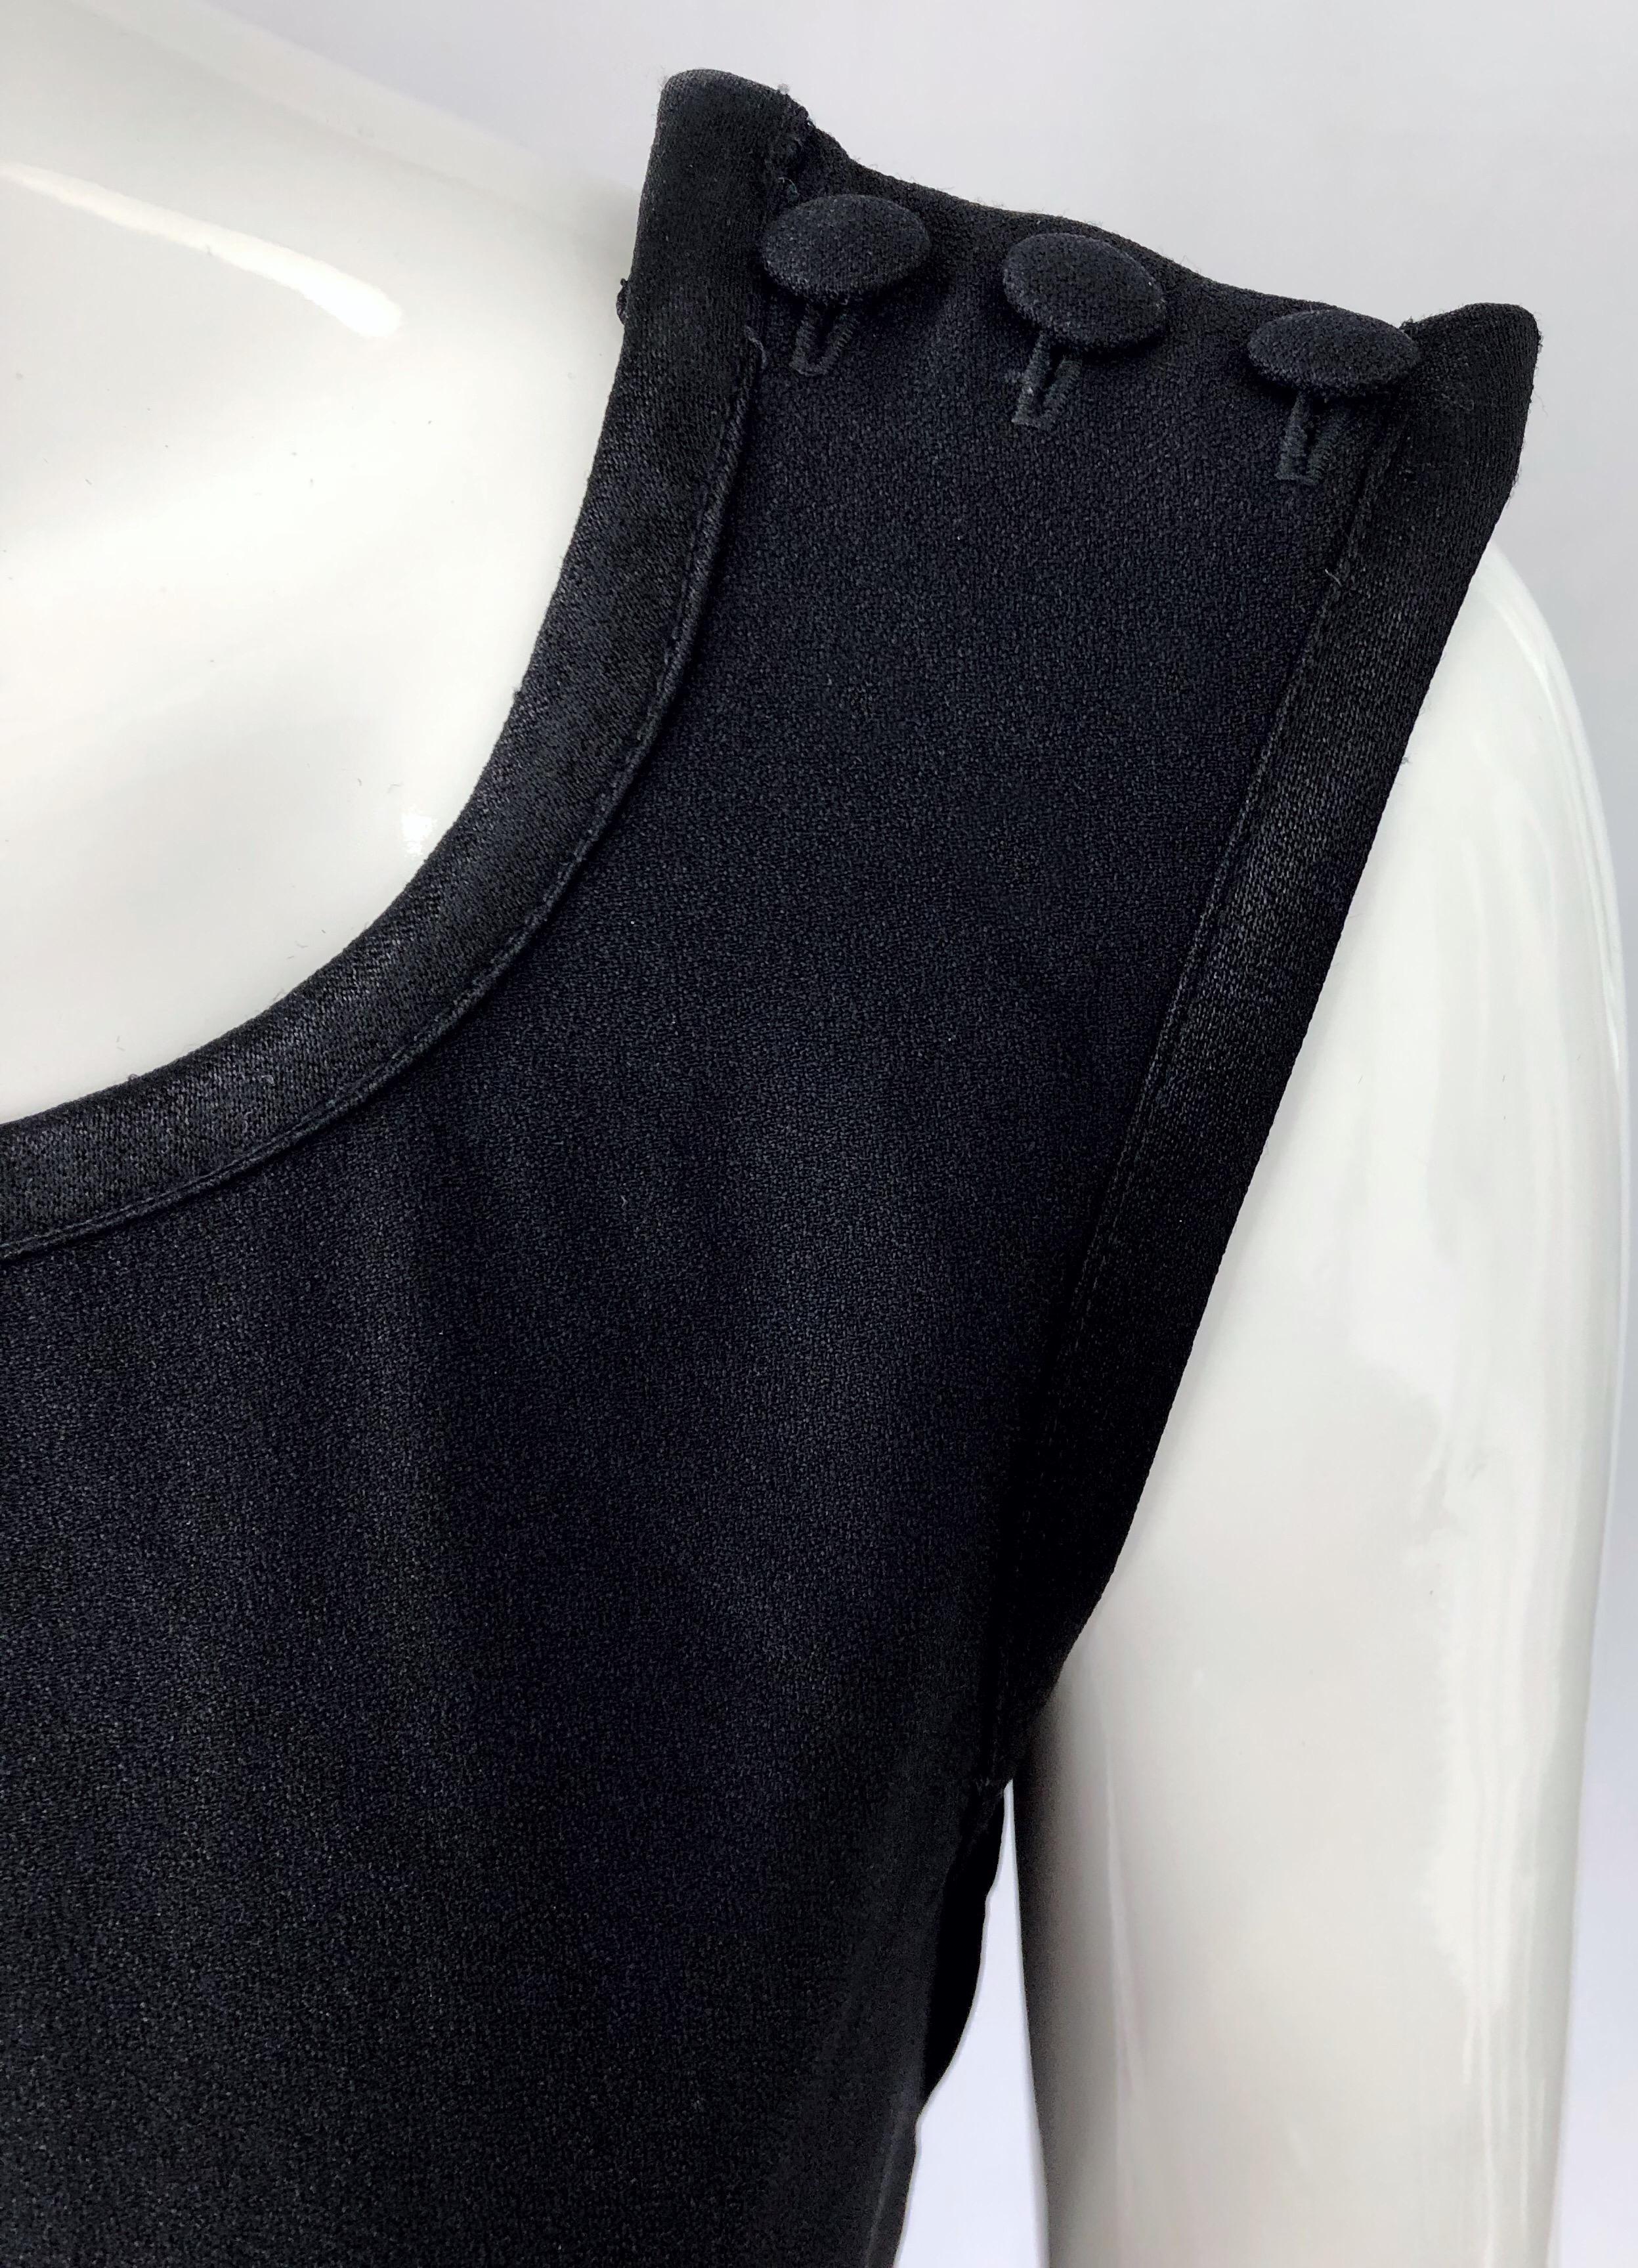  Vintage Yves Saint Laurent Romper Black Rayon Sleeveless 1990s One Piece 90s  For Sale 3